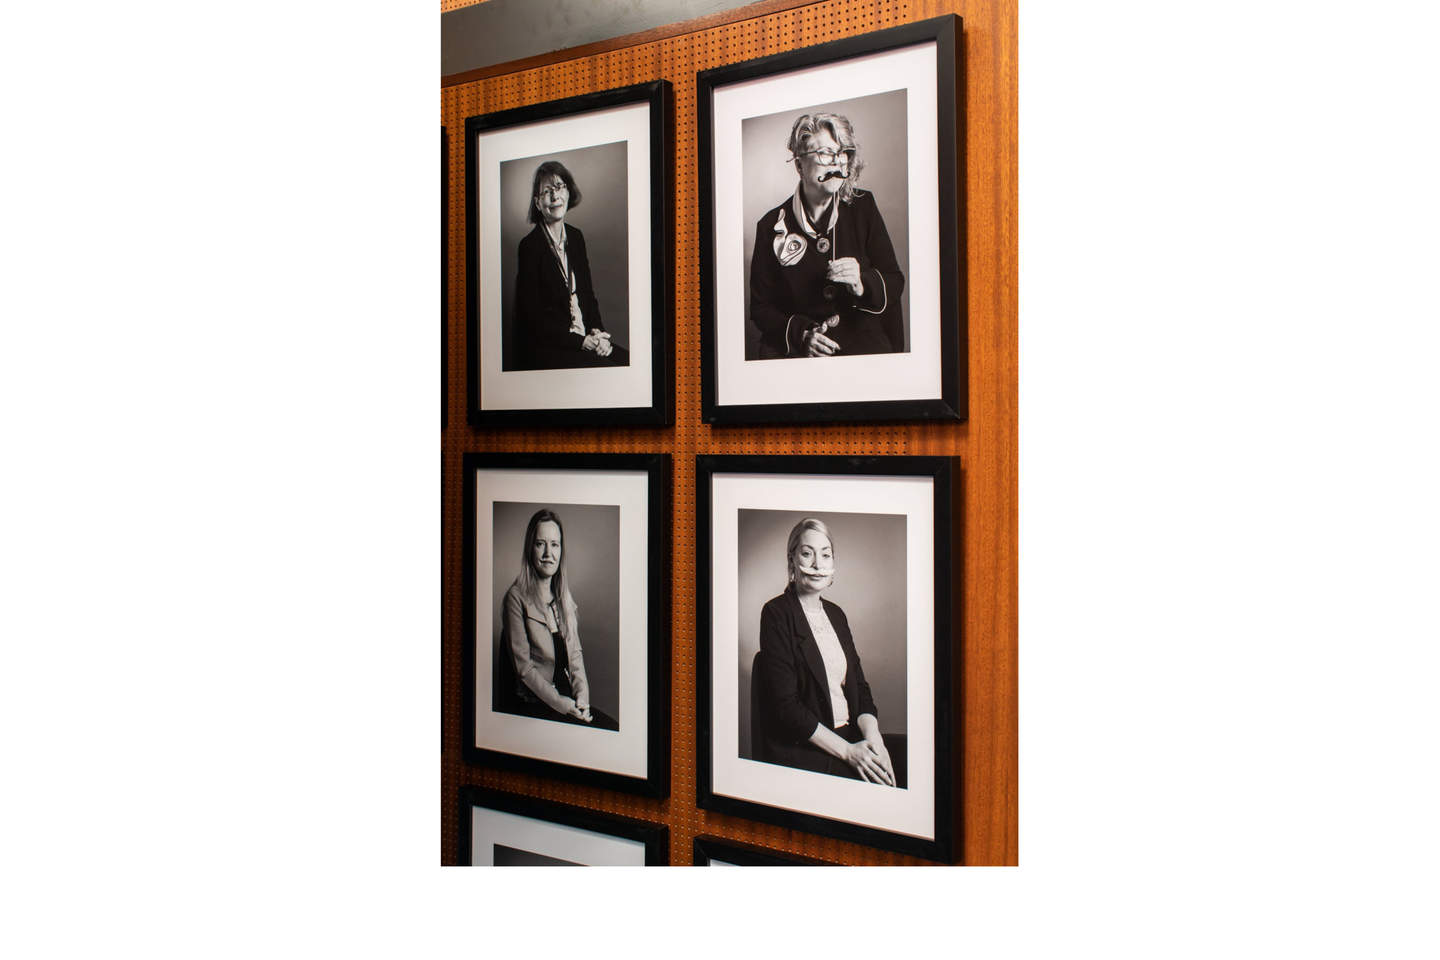 Interior of Bayside City Council Chambers with Changing Faces photographs installed